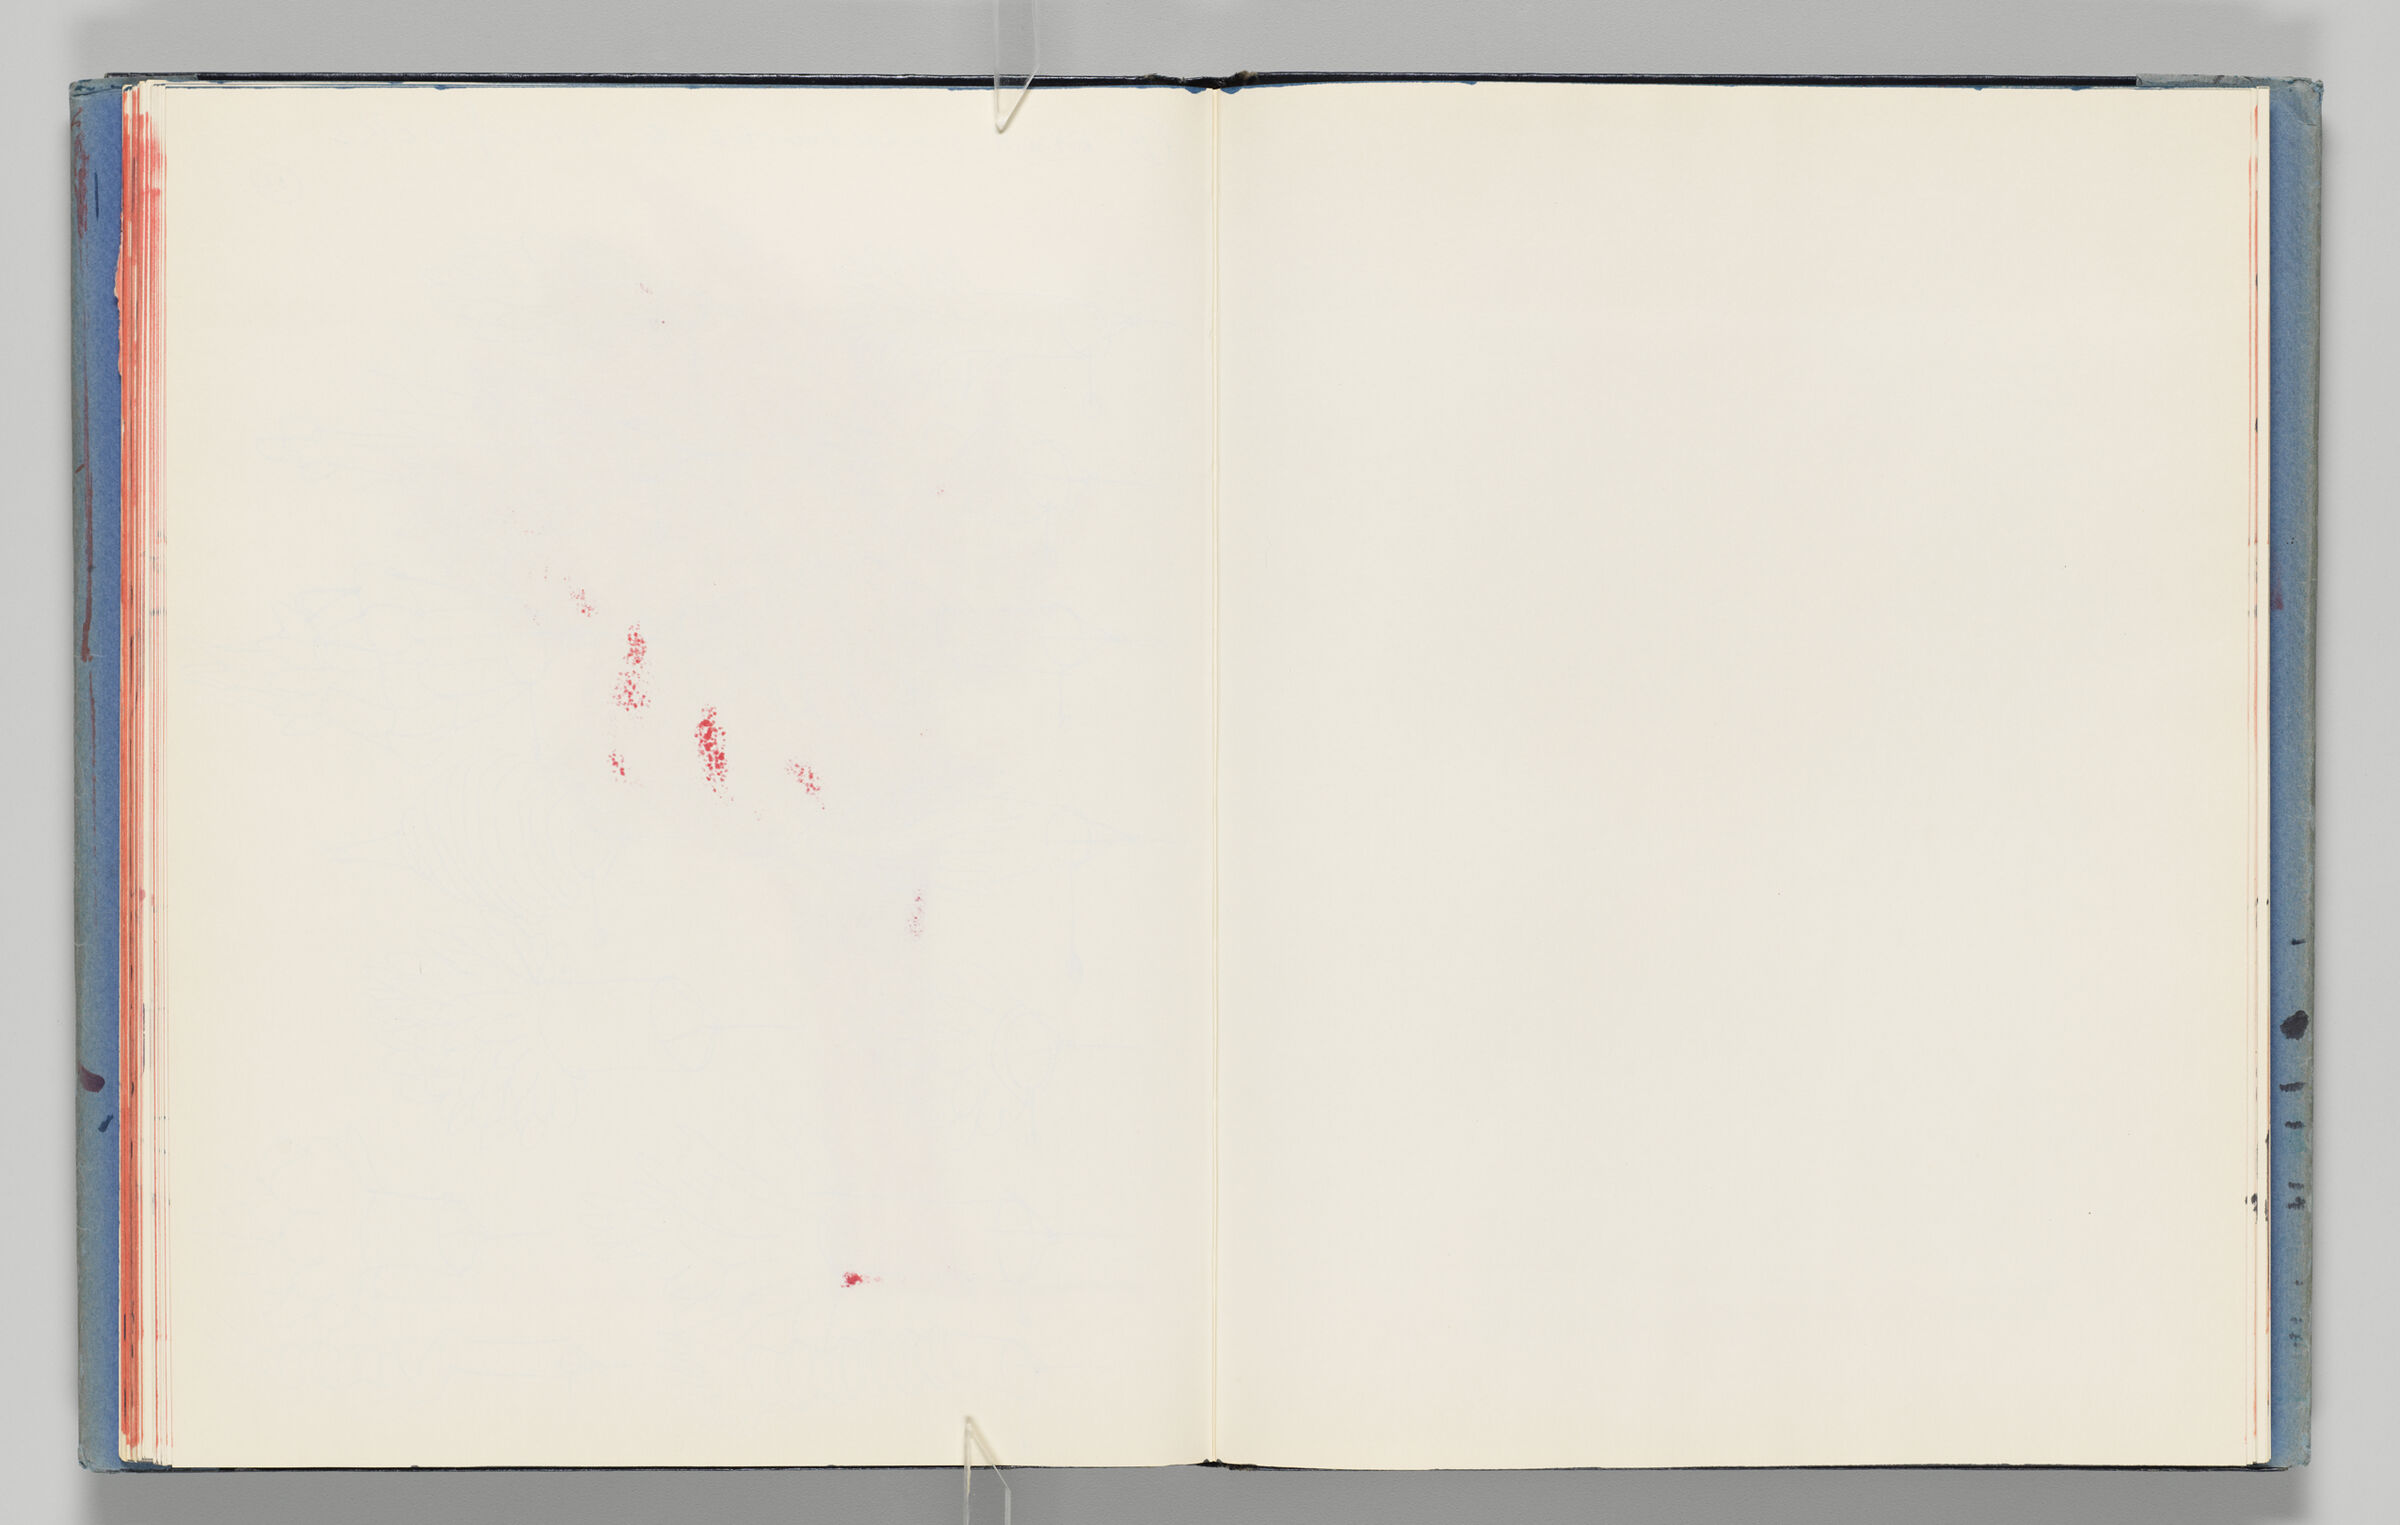 Untitled (Blank With Stray Red Mark, Left Page); Untitled (Blank, Right Page)